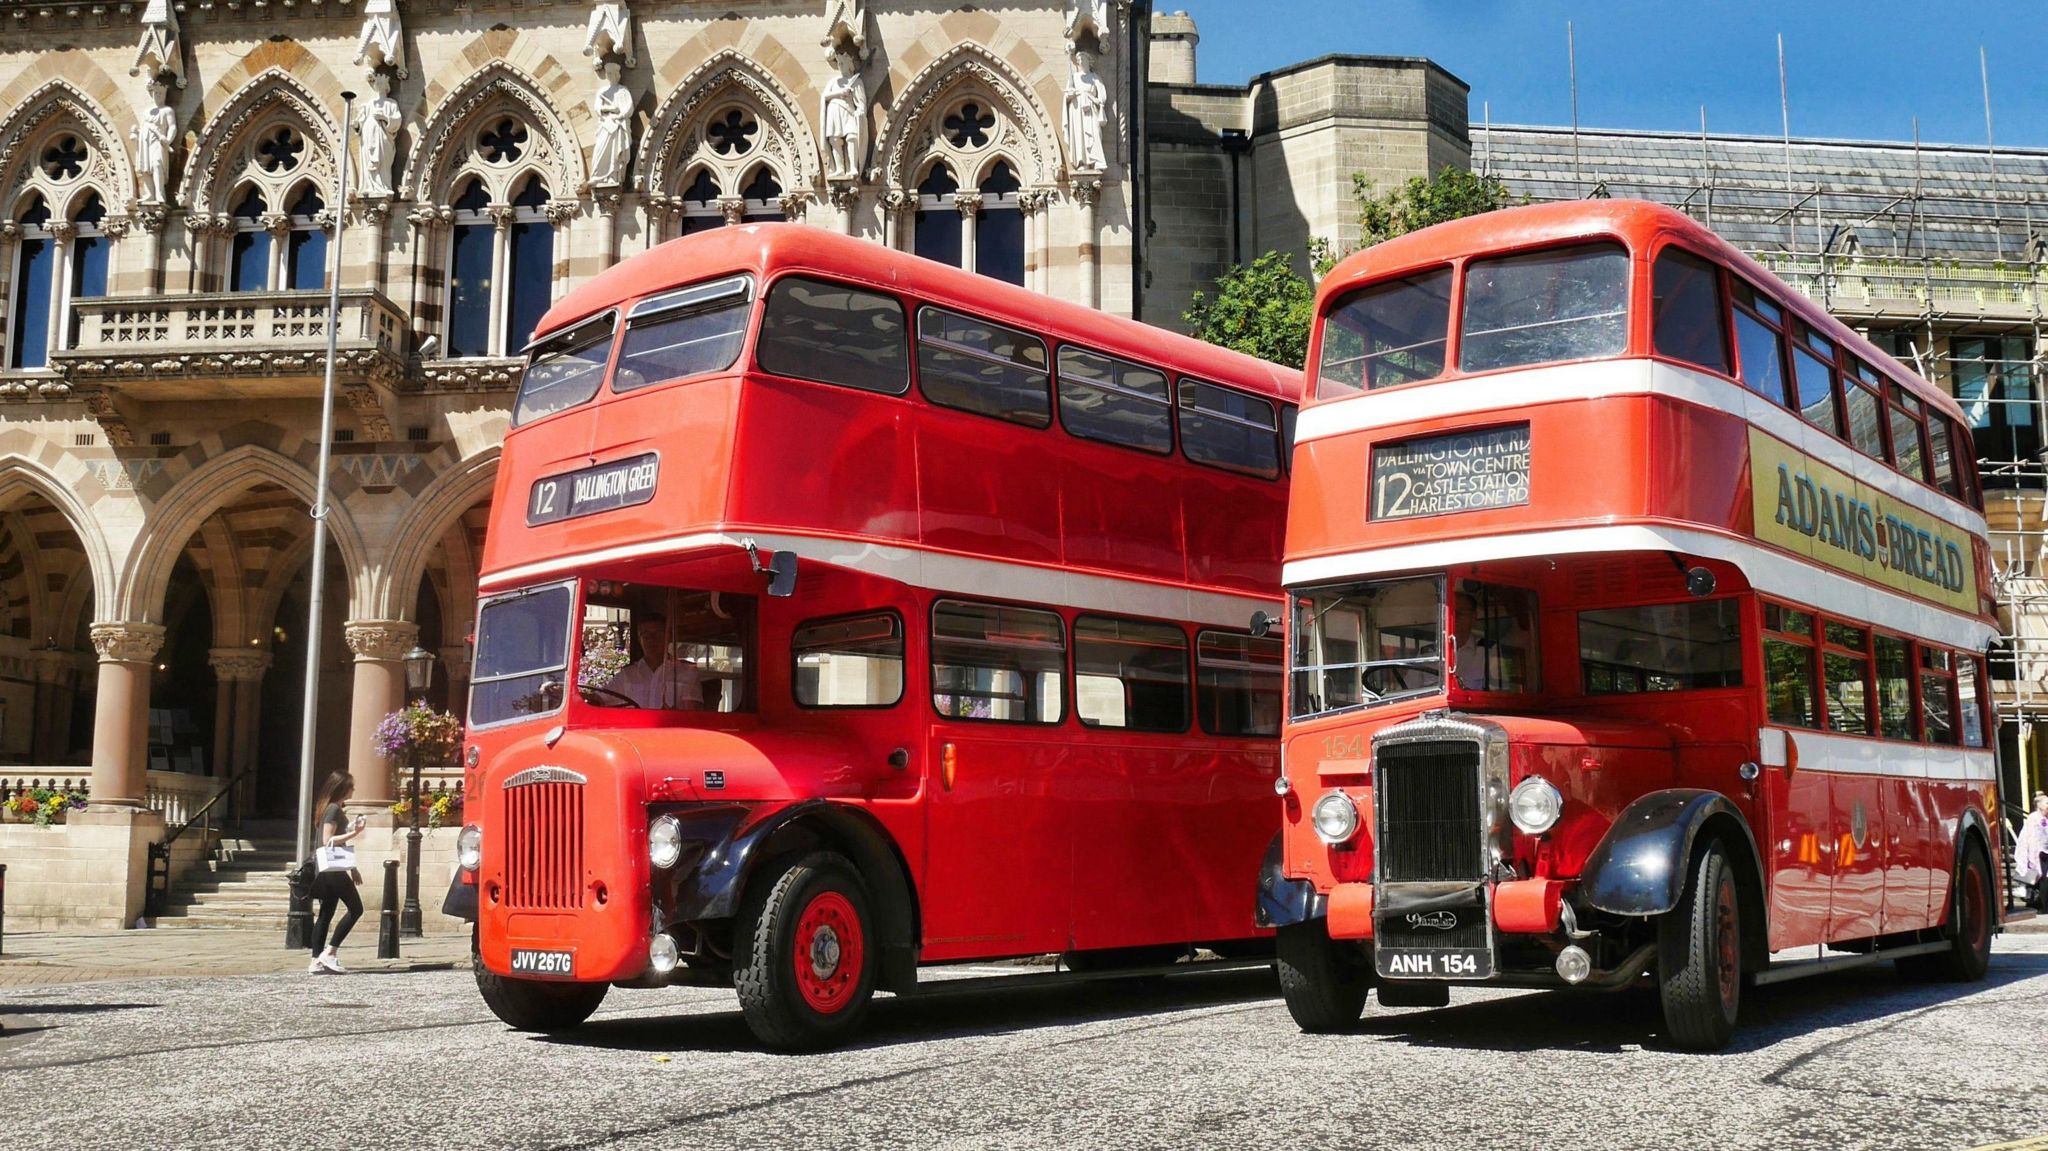 Two red double decker buses with prominent front grilles parked outside Northampton Guildhall